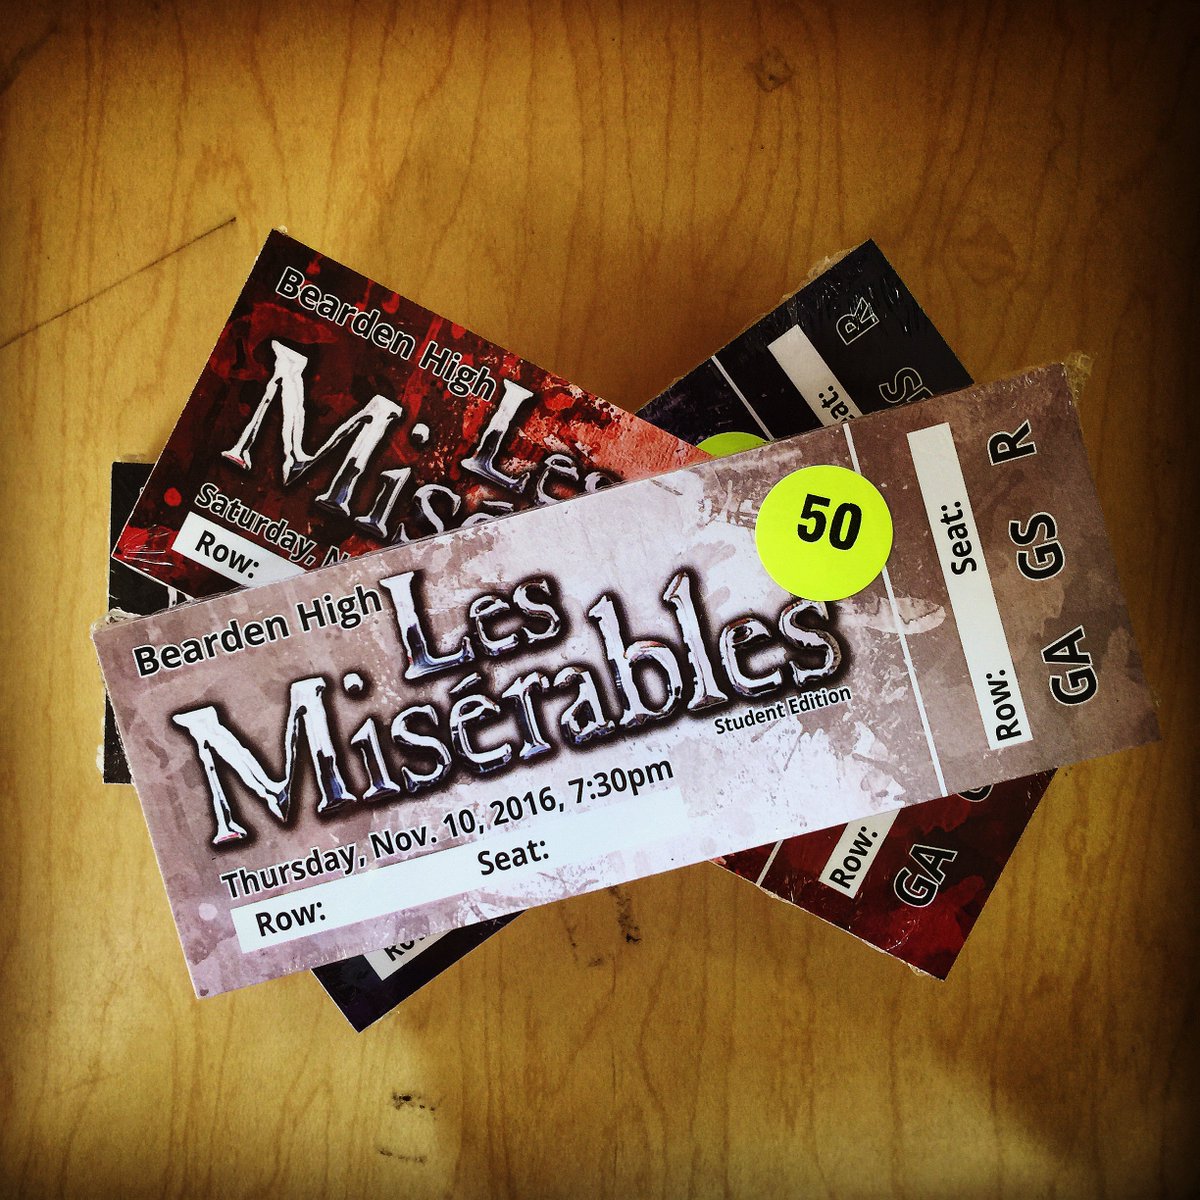 Tickets now on sale for #BeardenHighSchool 's #LesMis ! Reserved @ BHS from 12-2. GA tickets avail at BHS or beardentheatre.com!